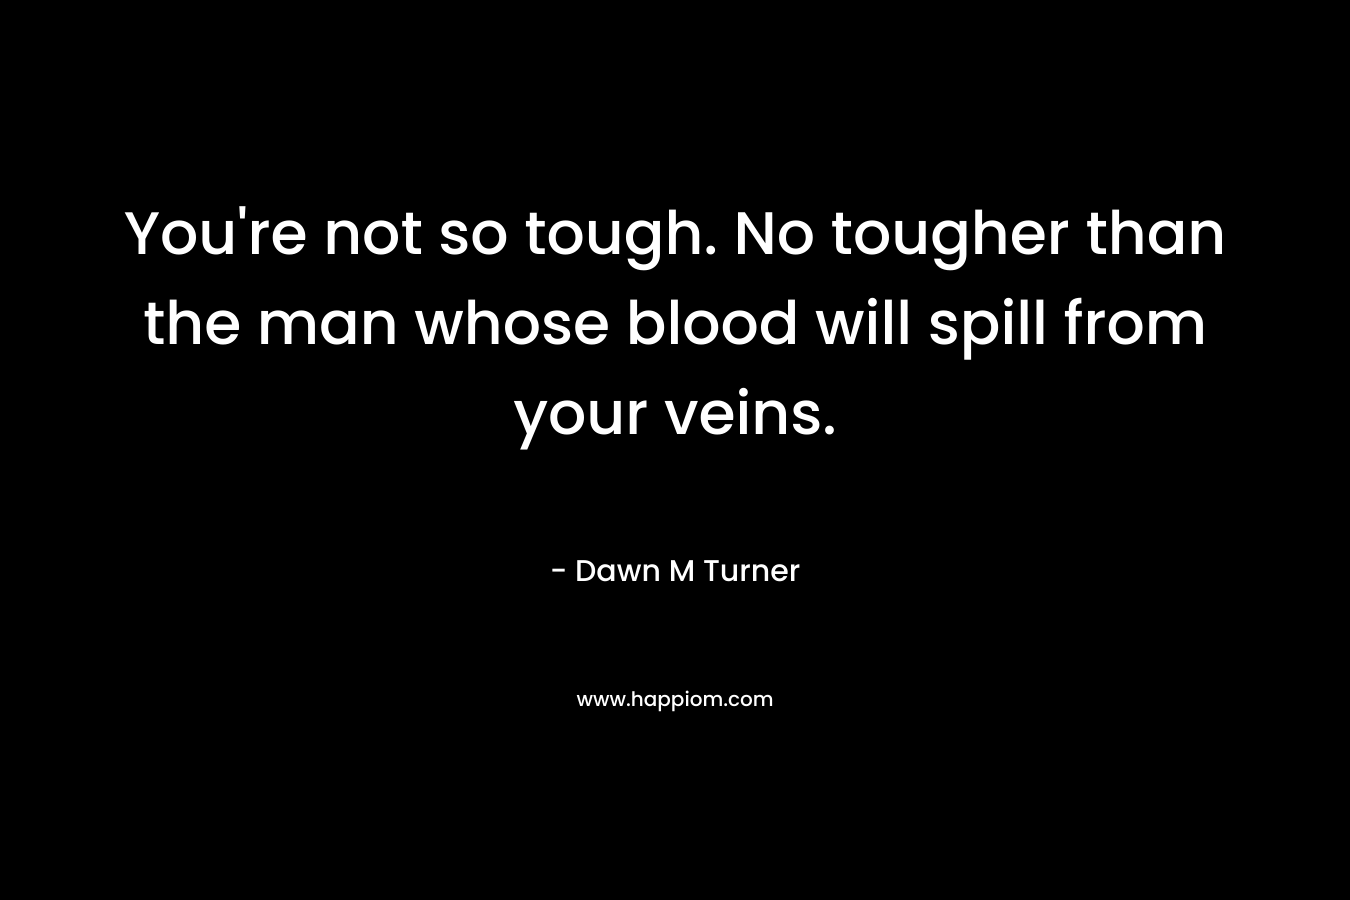 You're not so tough. No tougher than the man whose blood will spill from your veins.